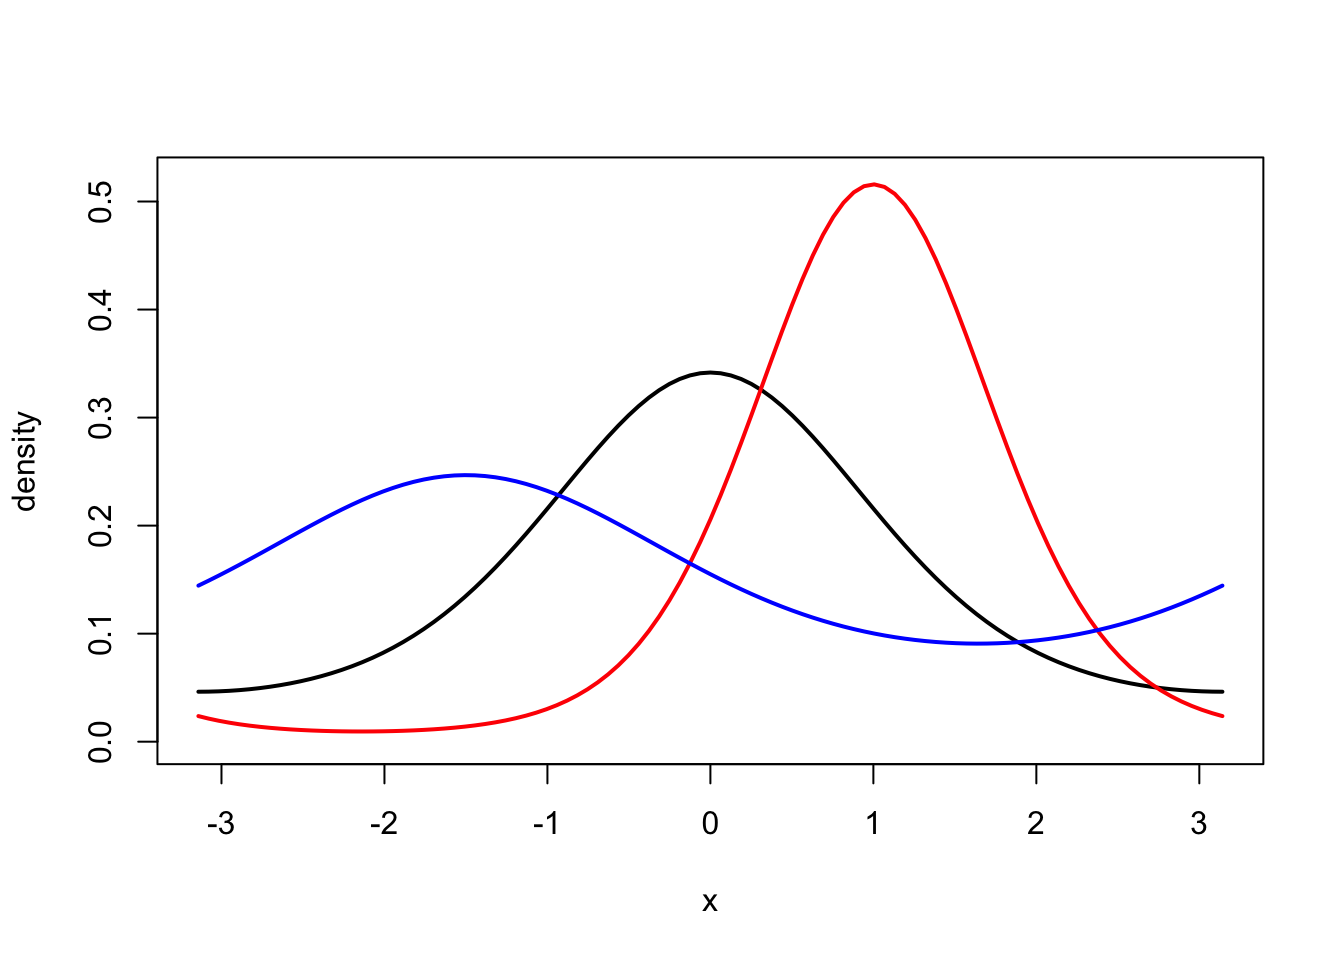 Density for the von Mises distribution with parameters \(\kappa = 1\) and \(\nu = 0\) (black), \(\kappa = 2\) and \(\nu = 1\) (red), and \(\kappa = 0.5\) and \(\nu = - 1.5\) (blue).